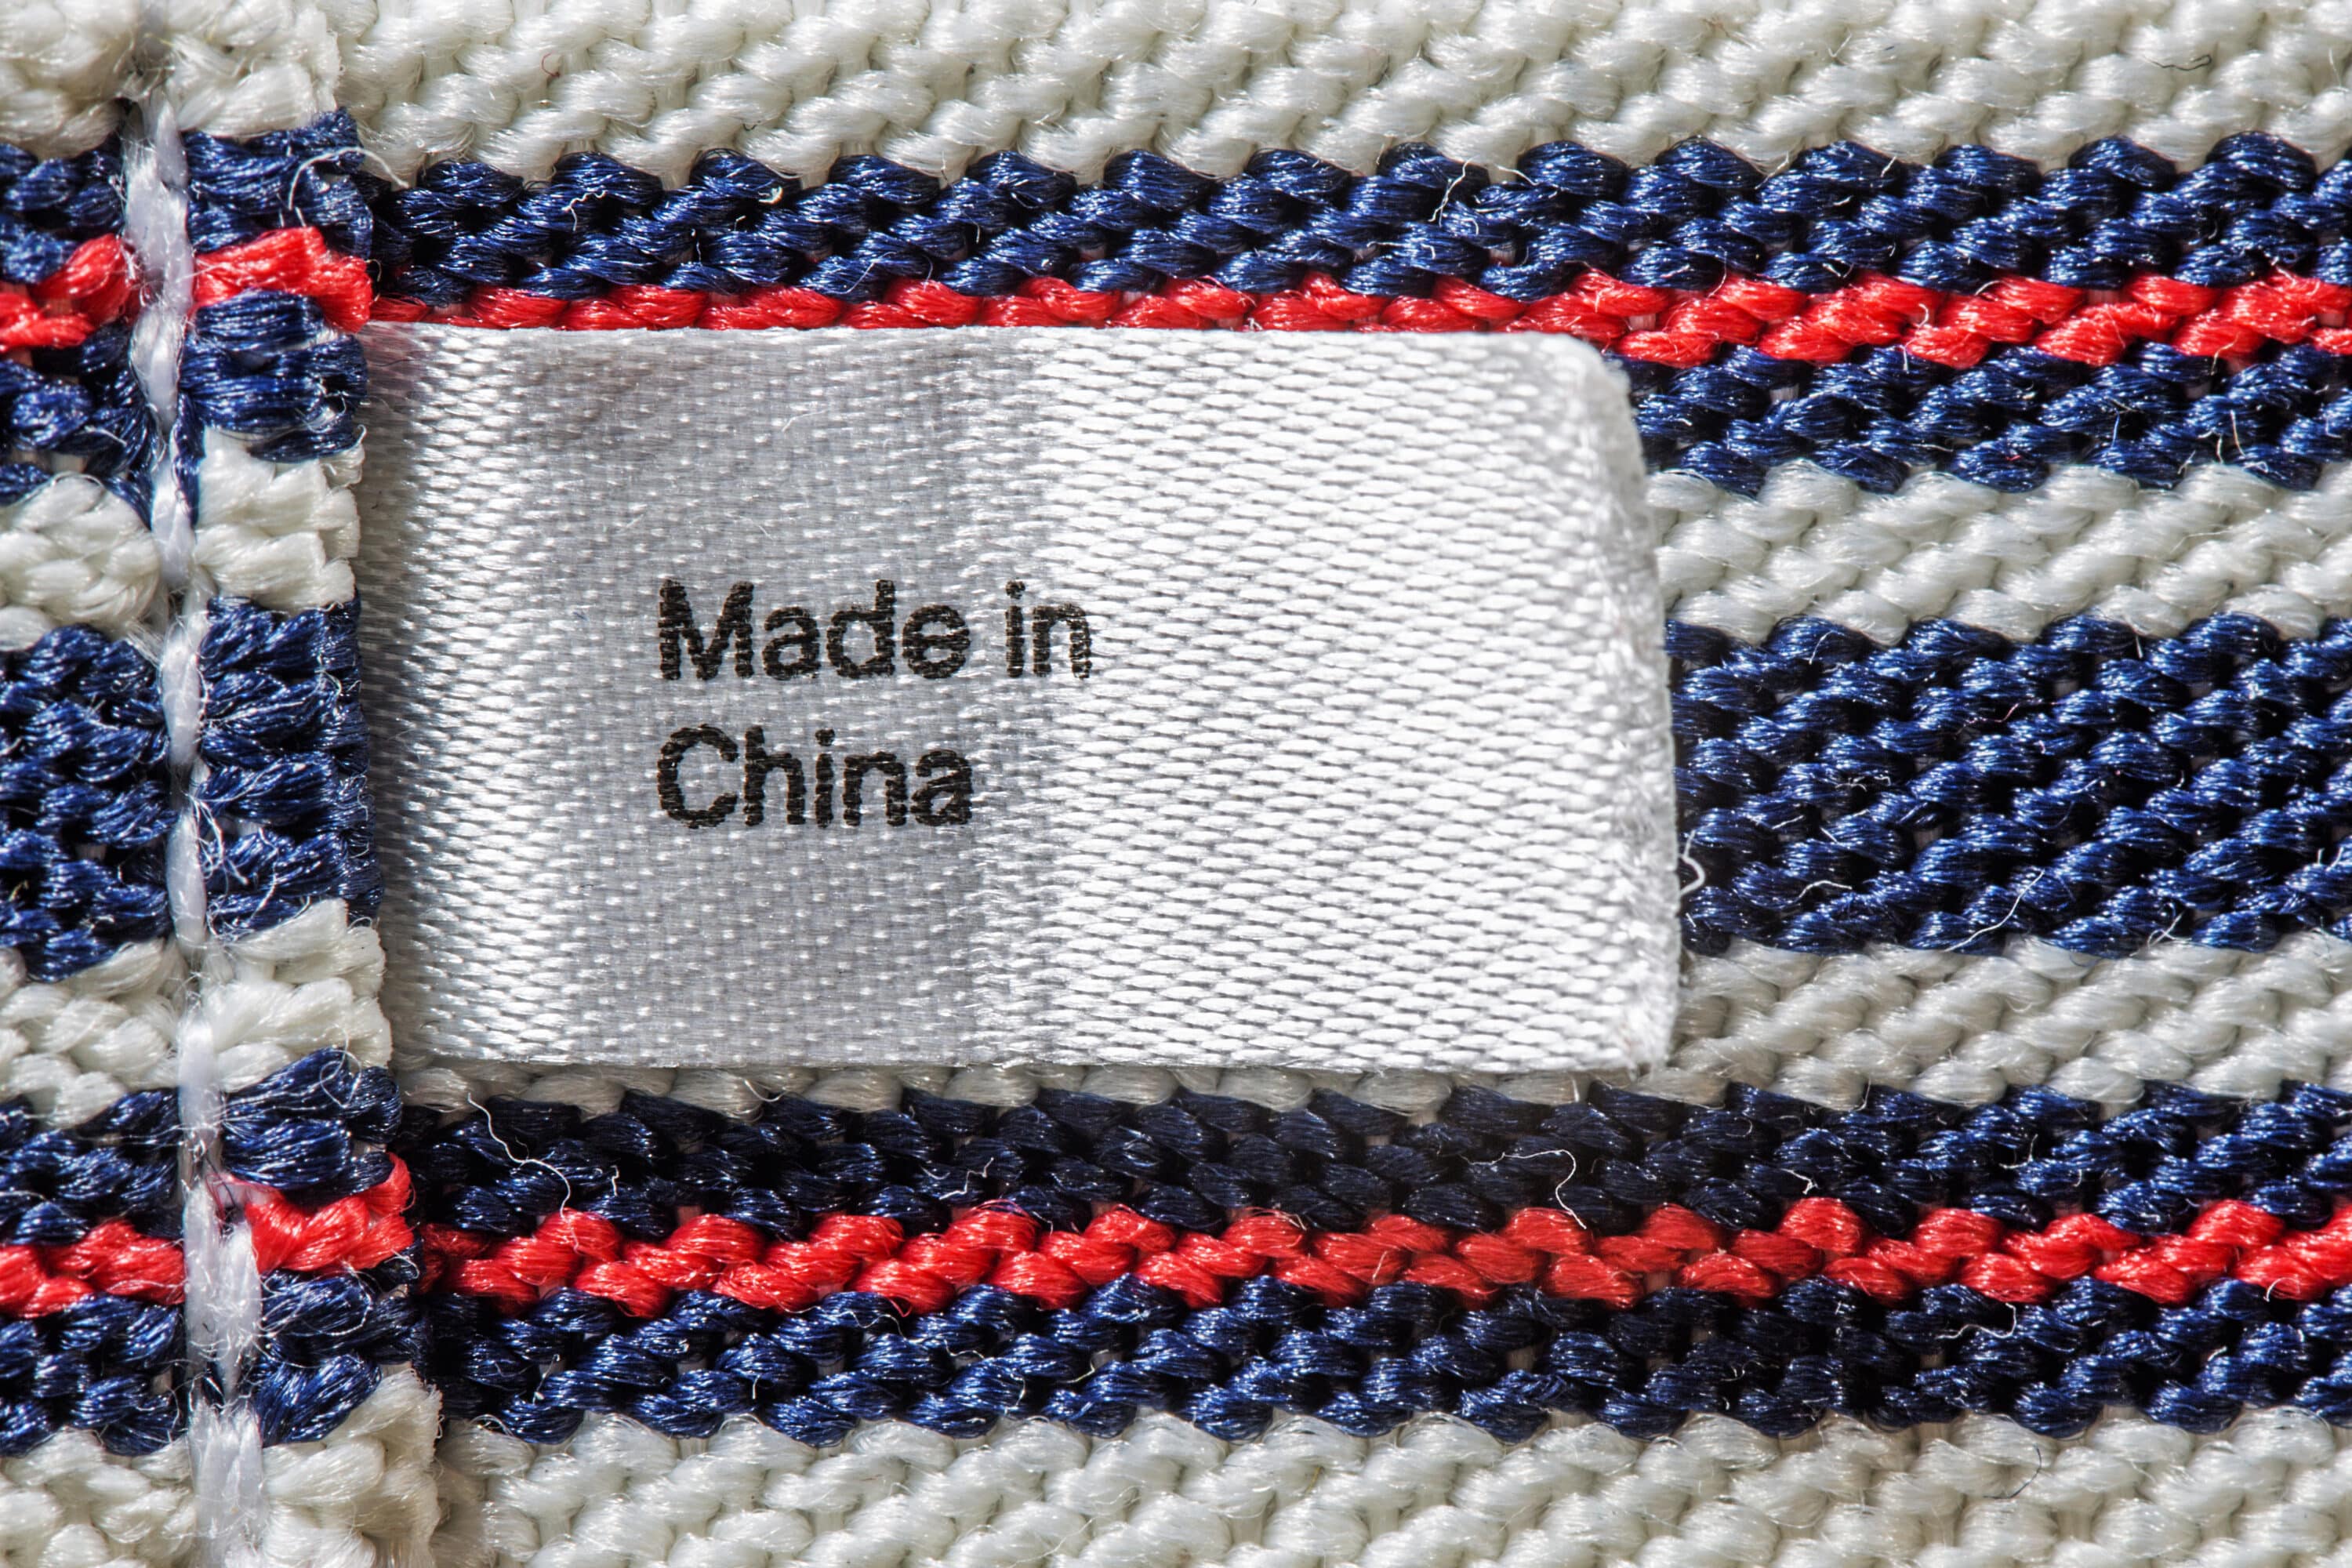 Made in PRC – that’s what it means